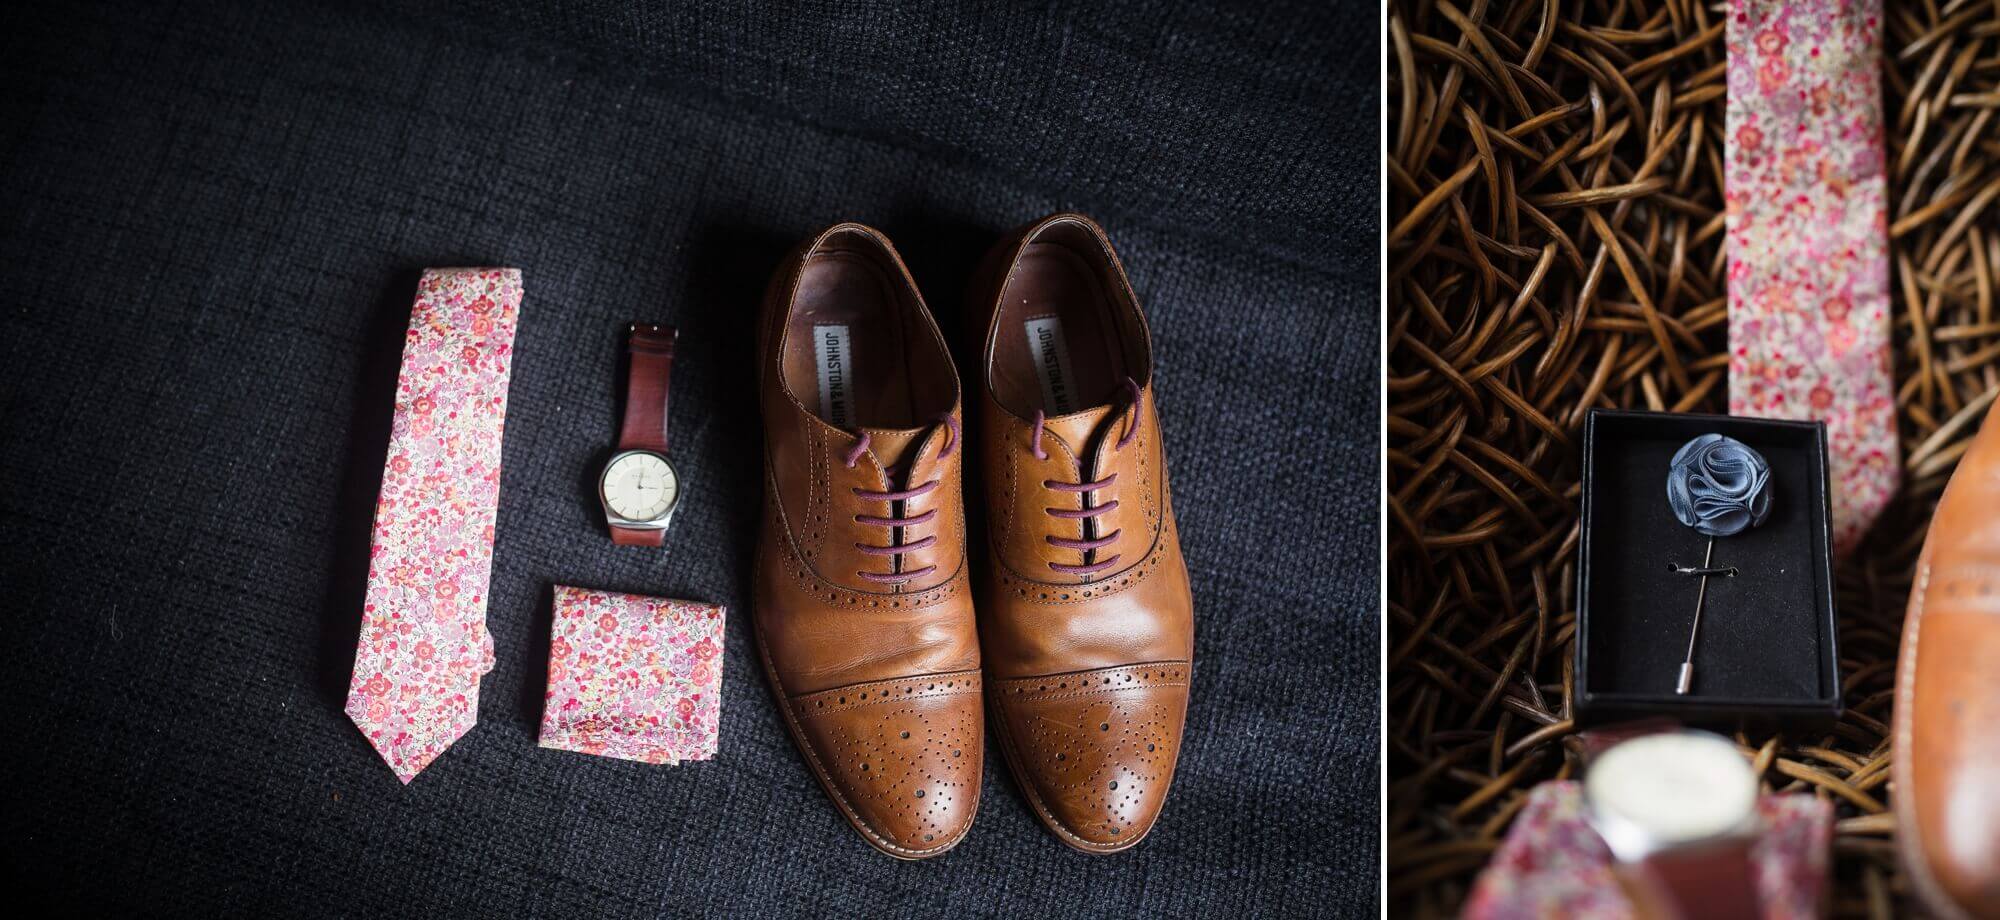 Details of the grooms boho floral tie, watch and shoes 